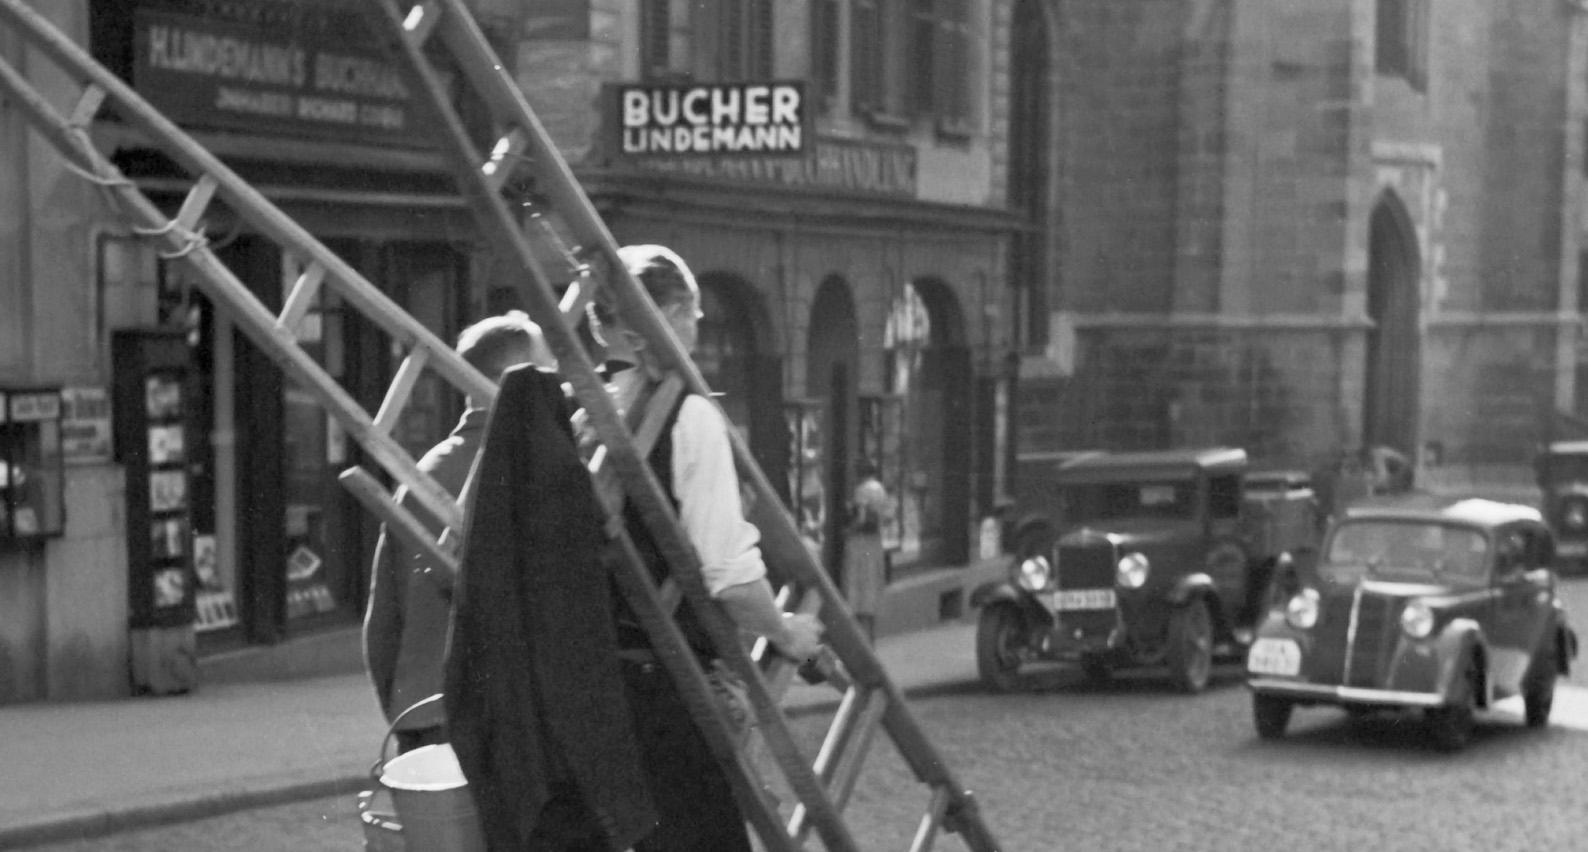 Workers crossing the street, Stuttgart Germany 1935, Printed Later - Photograph by Karl Heinrich Lämmel